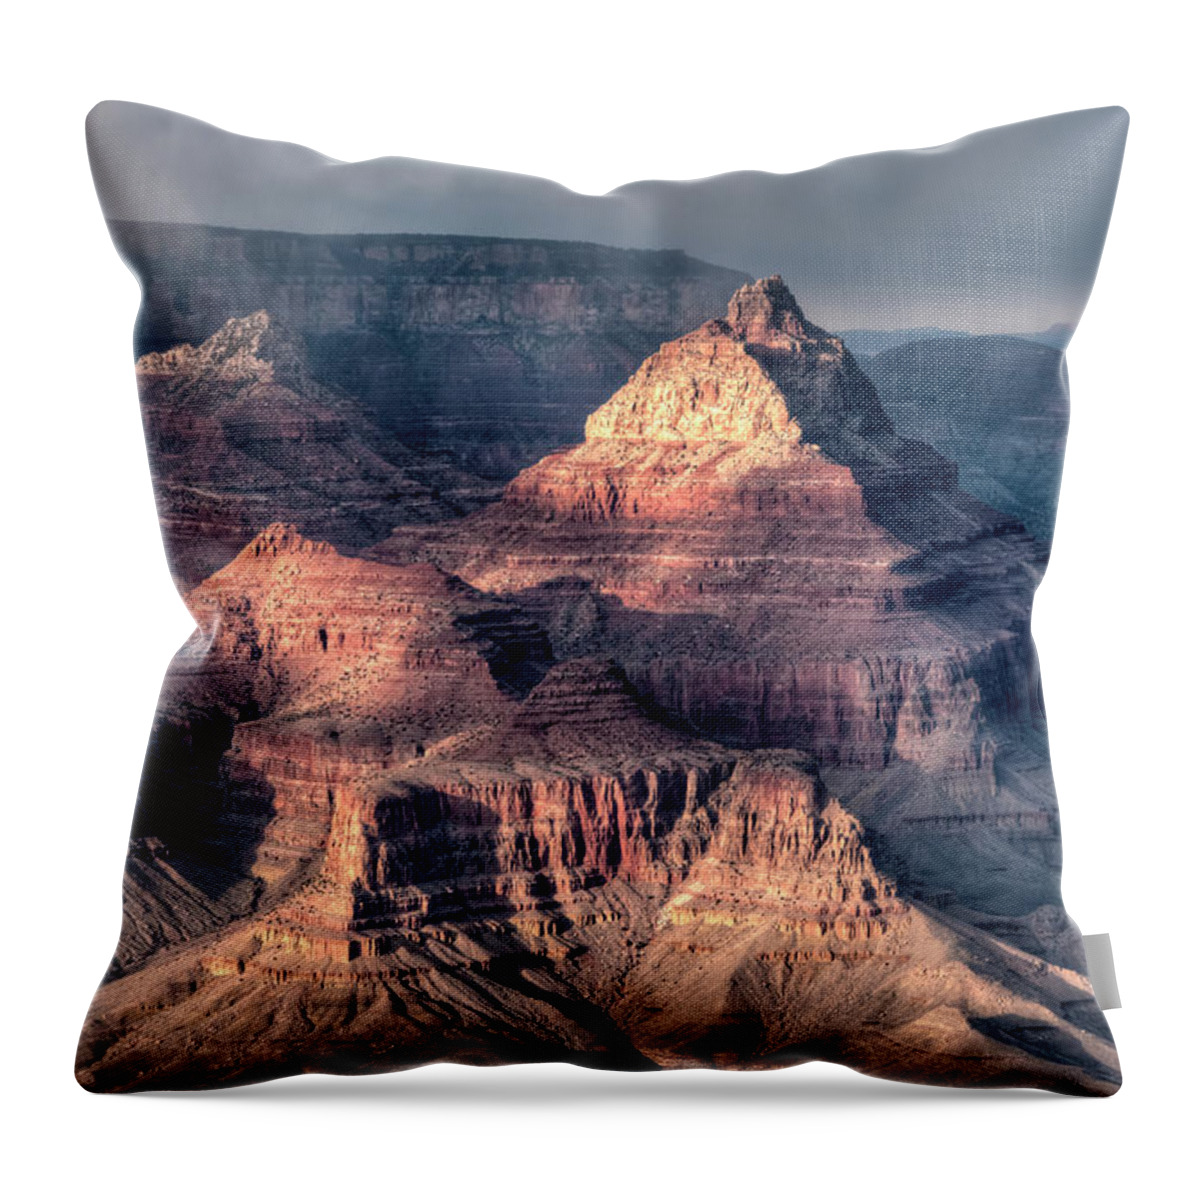 Geology Throw Pillow featuring the photograph Grand Canyon, View From South Rim by Mark Newman